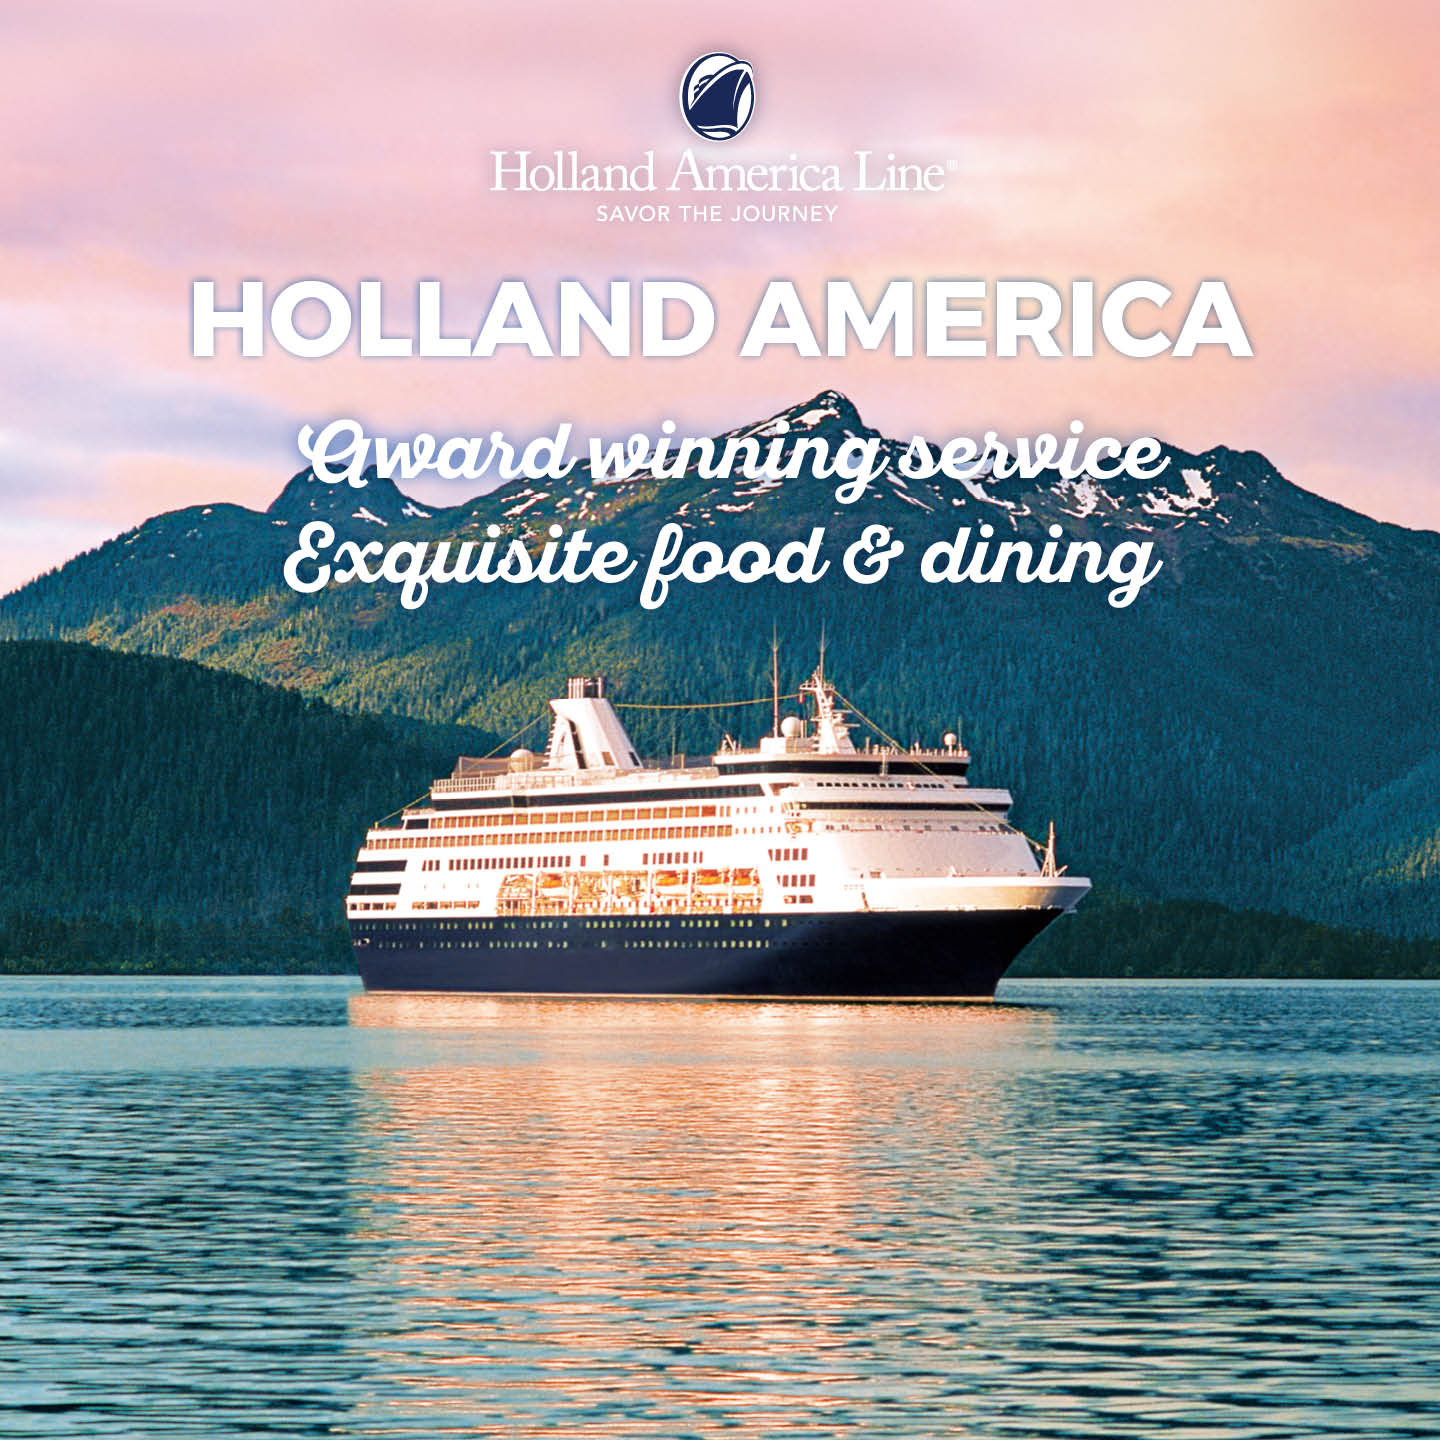 Holland America Cruise Deals Departing From Sydney Onboard Ms Noordam And Ms Maasdam Cruise Offers